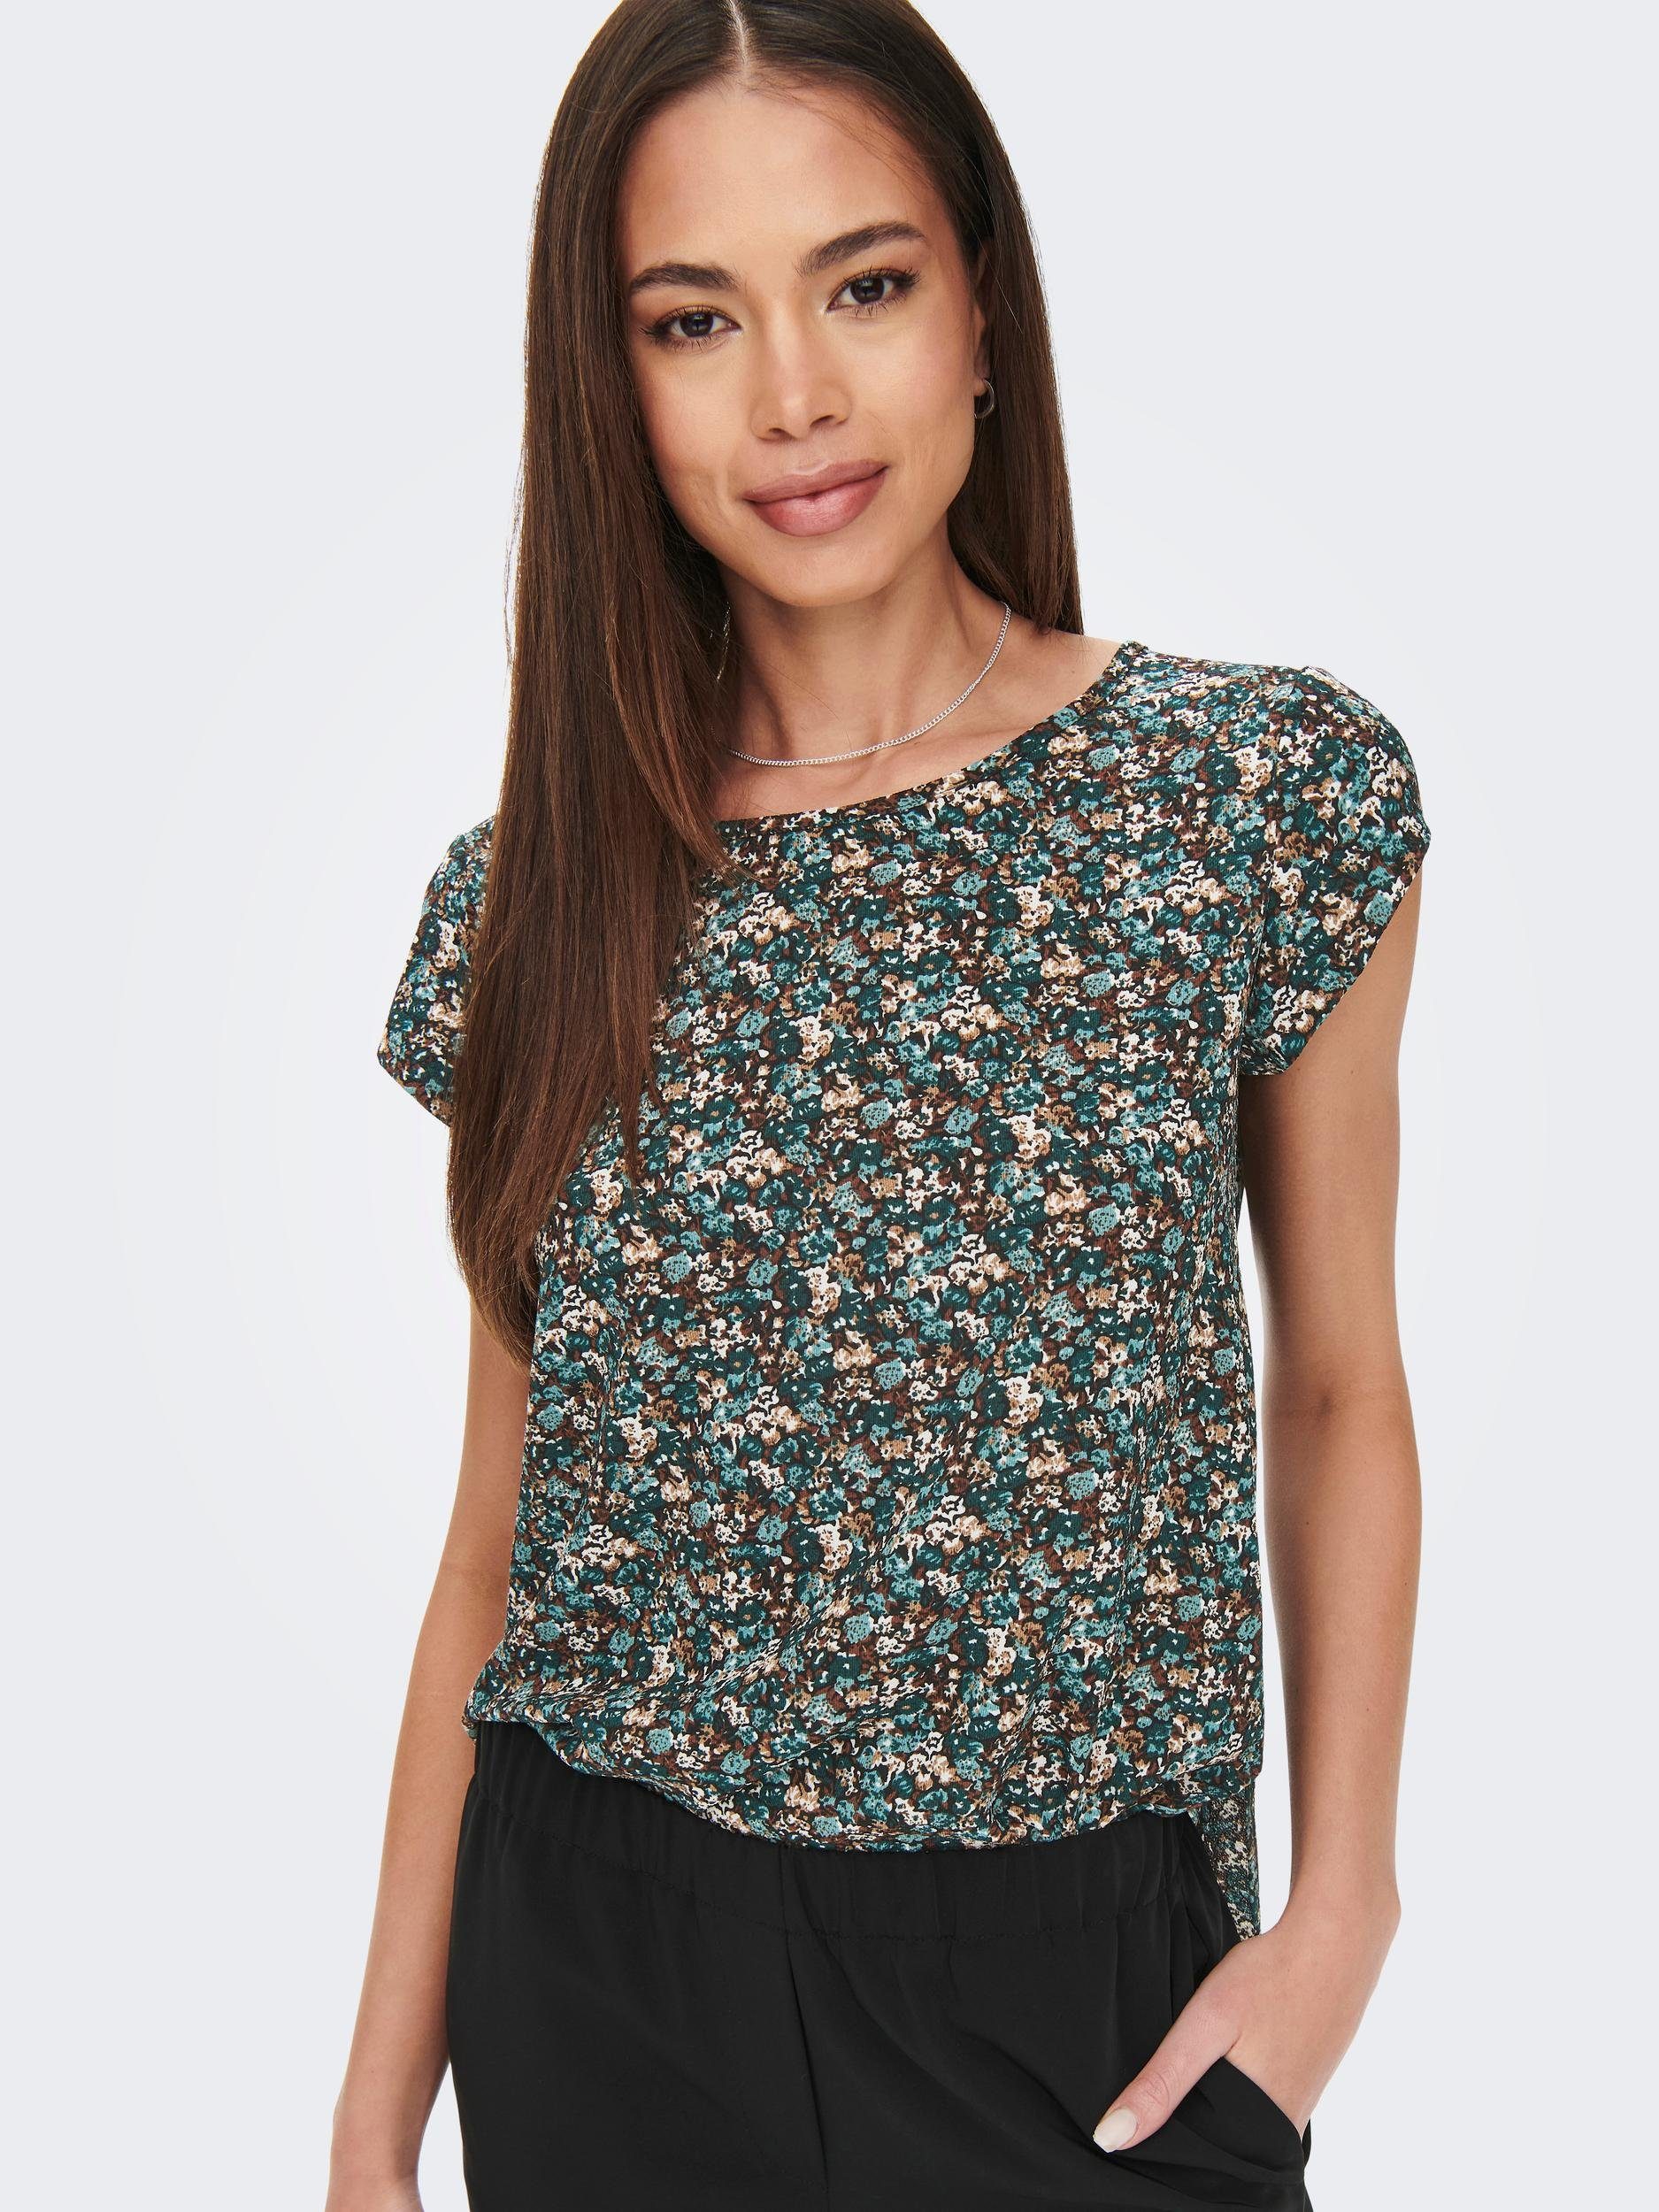 Shirtbluse ONLVIC mit NOOS Balsam PTM FALL Print S/S AOP TOP Green ONLY DITSY